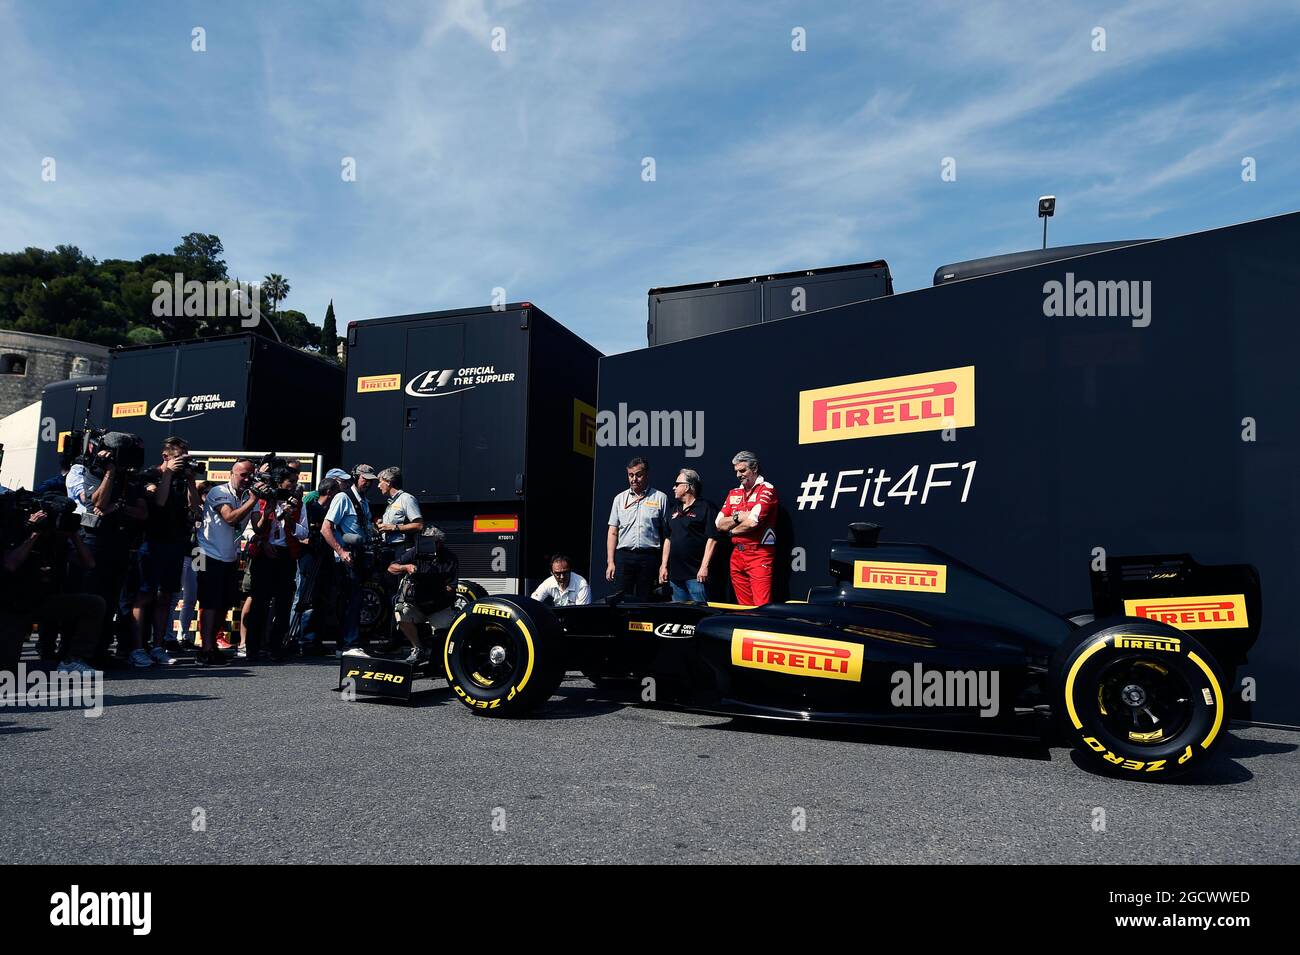 Pirelli reveal a mock up of what a 2017 F1 car and tyres may look like (L to R): Mario Isola (ITA) Pirelli Racing Manager with Gene Haas (USA) Haas Automotion President and Maurizio Arrivabene (ITA) Ferrari Team Principal. Monaco Grand Prix, Saturday 28th May 2016. Monte Carlo, Monaco. Stock Photo